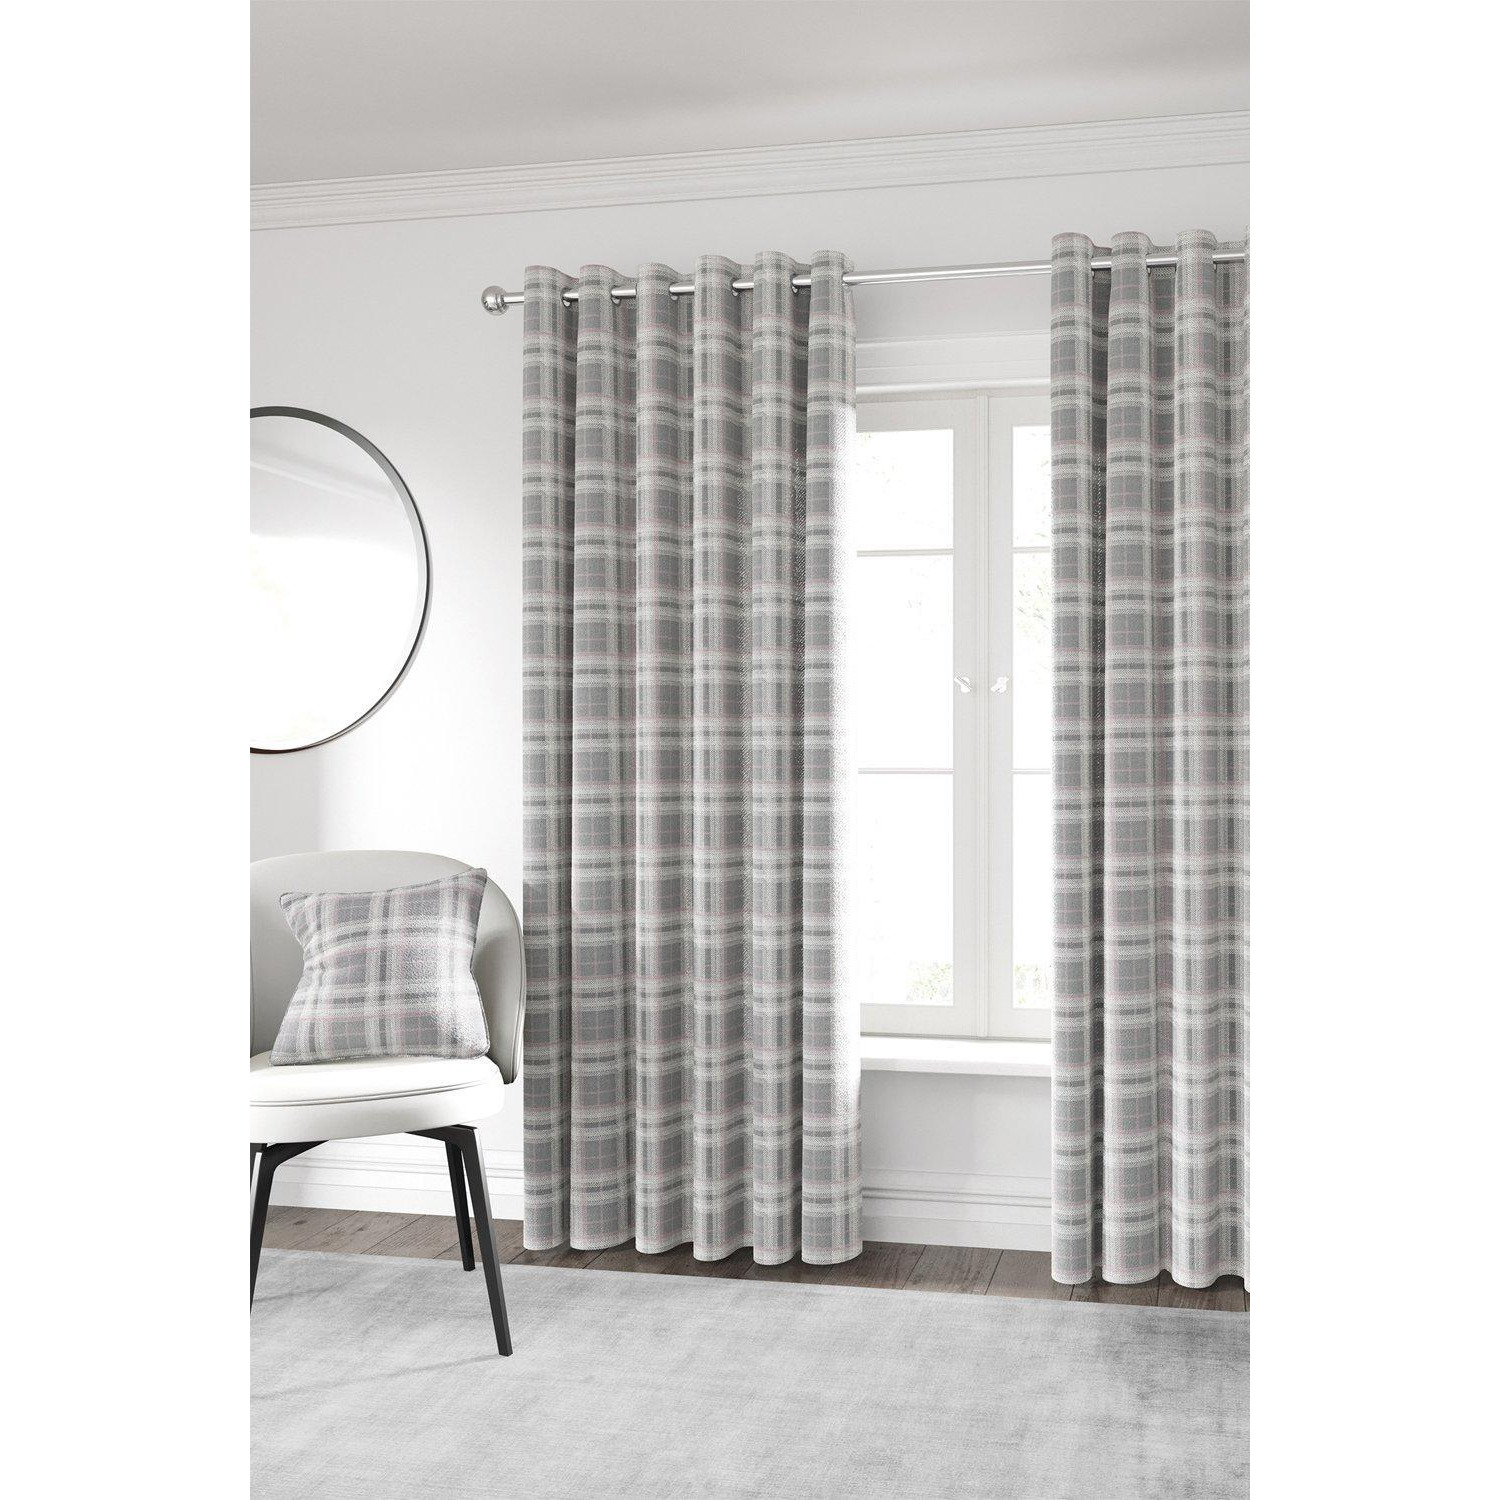 'Harriet' Woven Lined Curtains - image 1